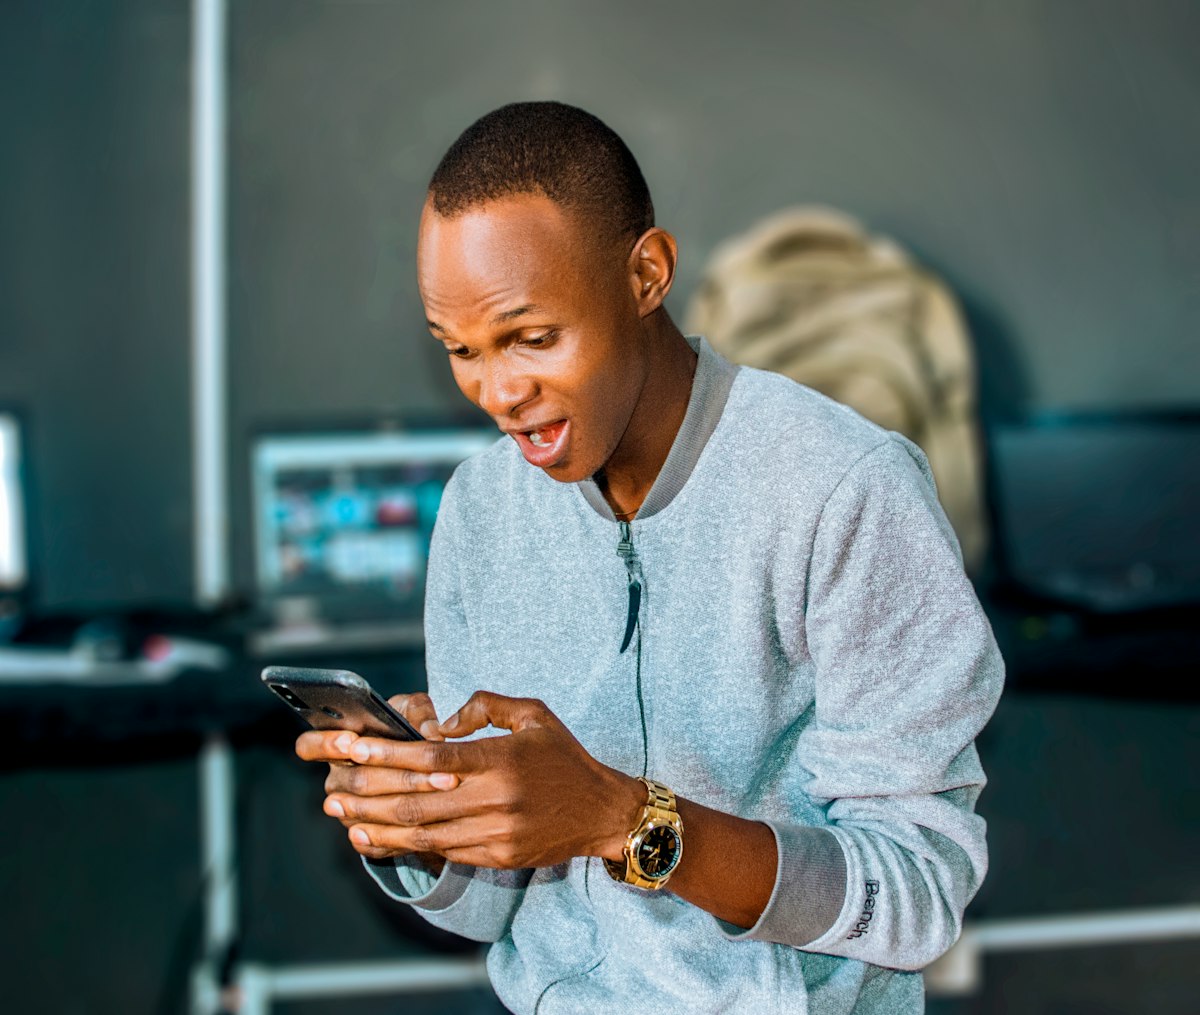 SimbaPay launches AI-powered chatbot to enable remittances via SMS in Africa